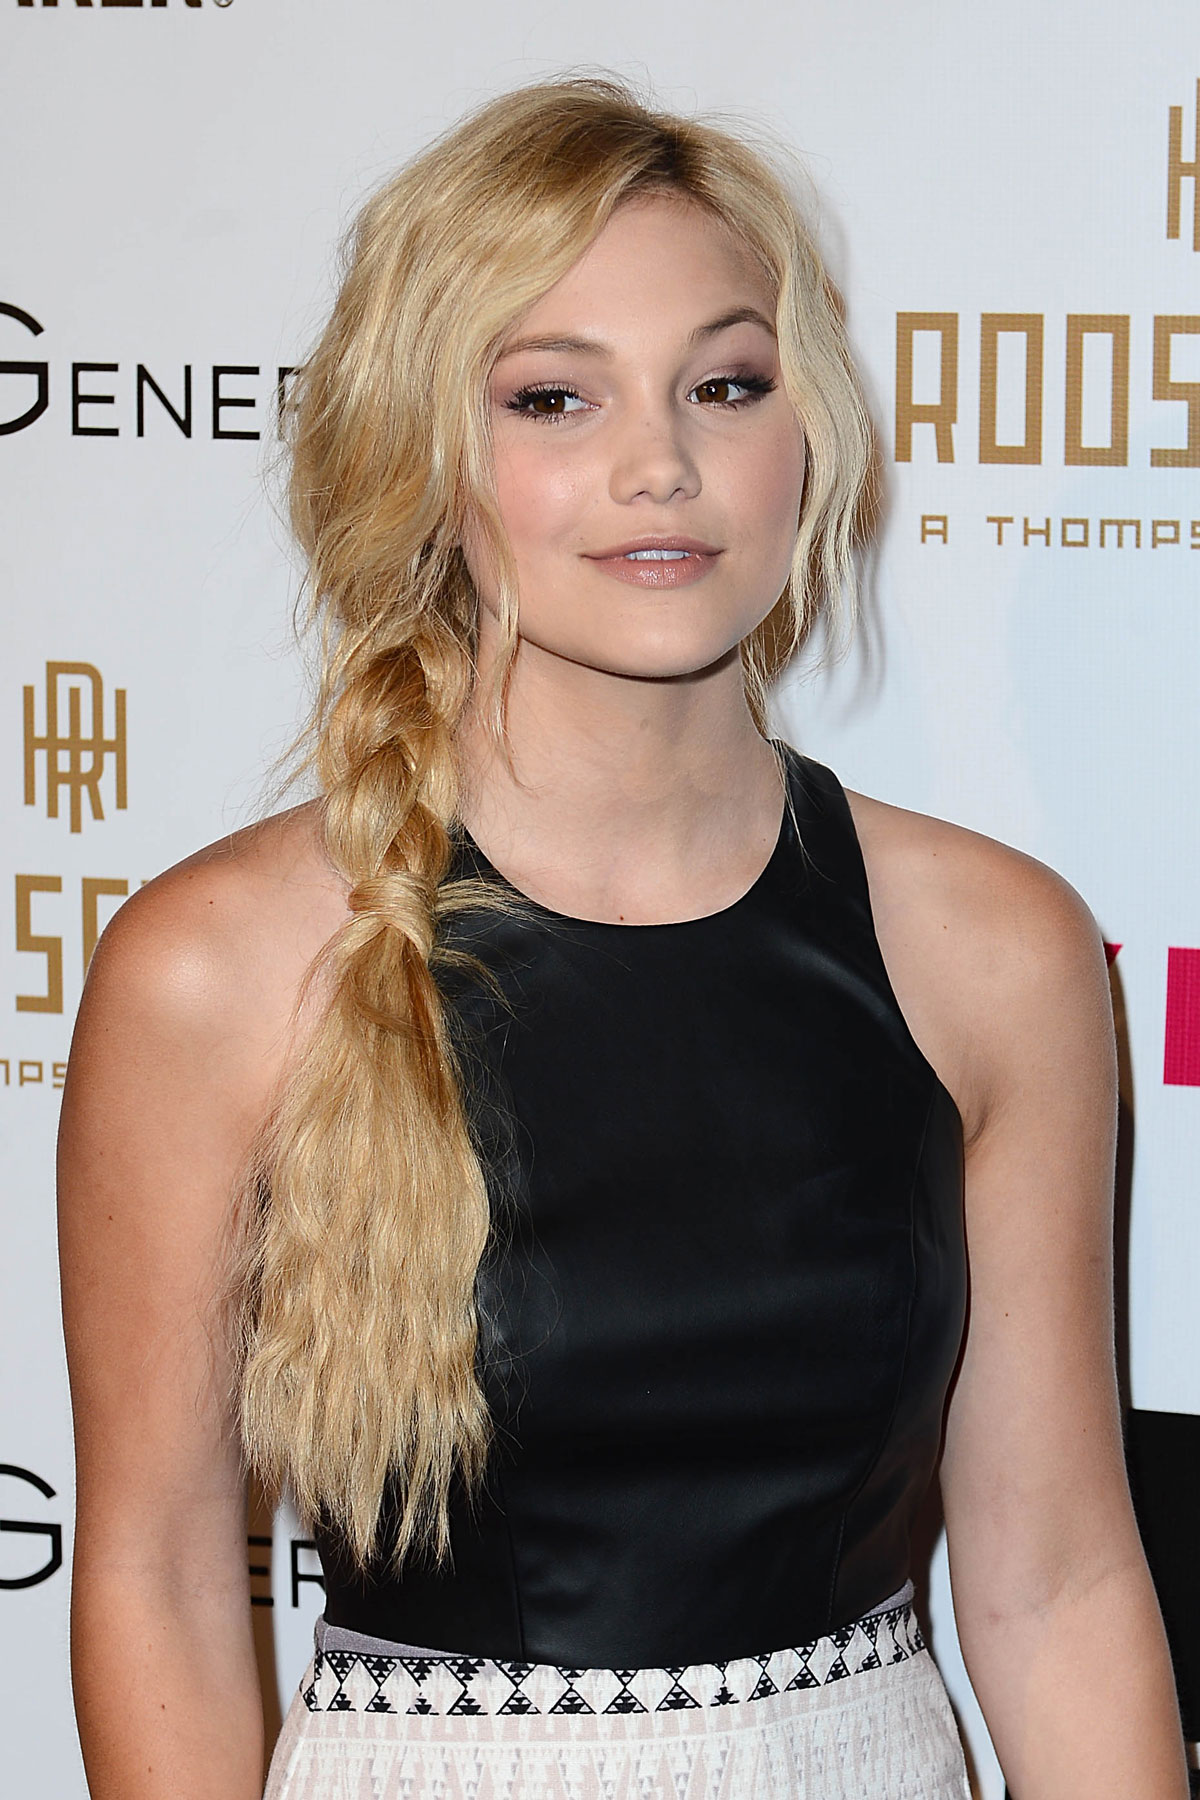 Olivia Holt attends the Nylon magazine Young Hollywood Party